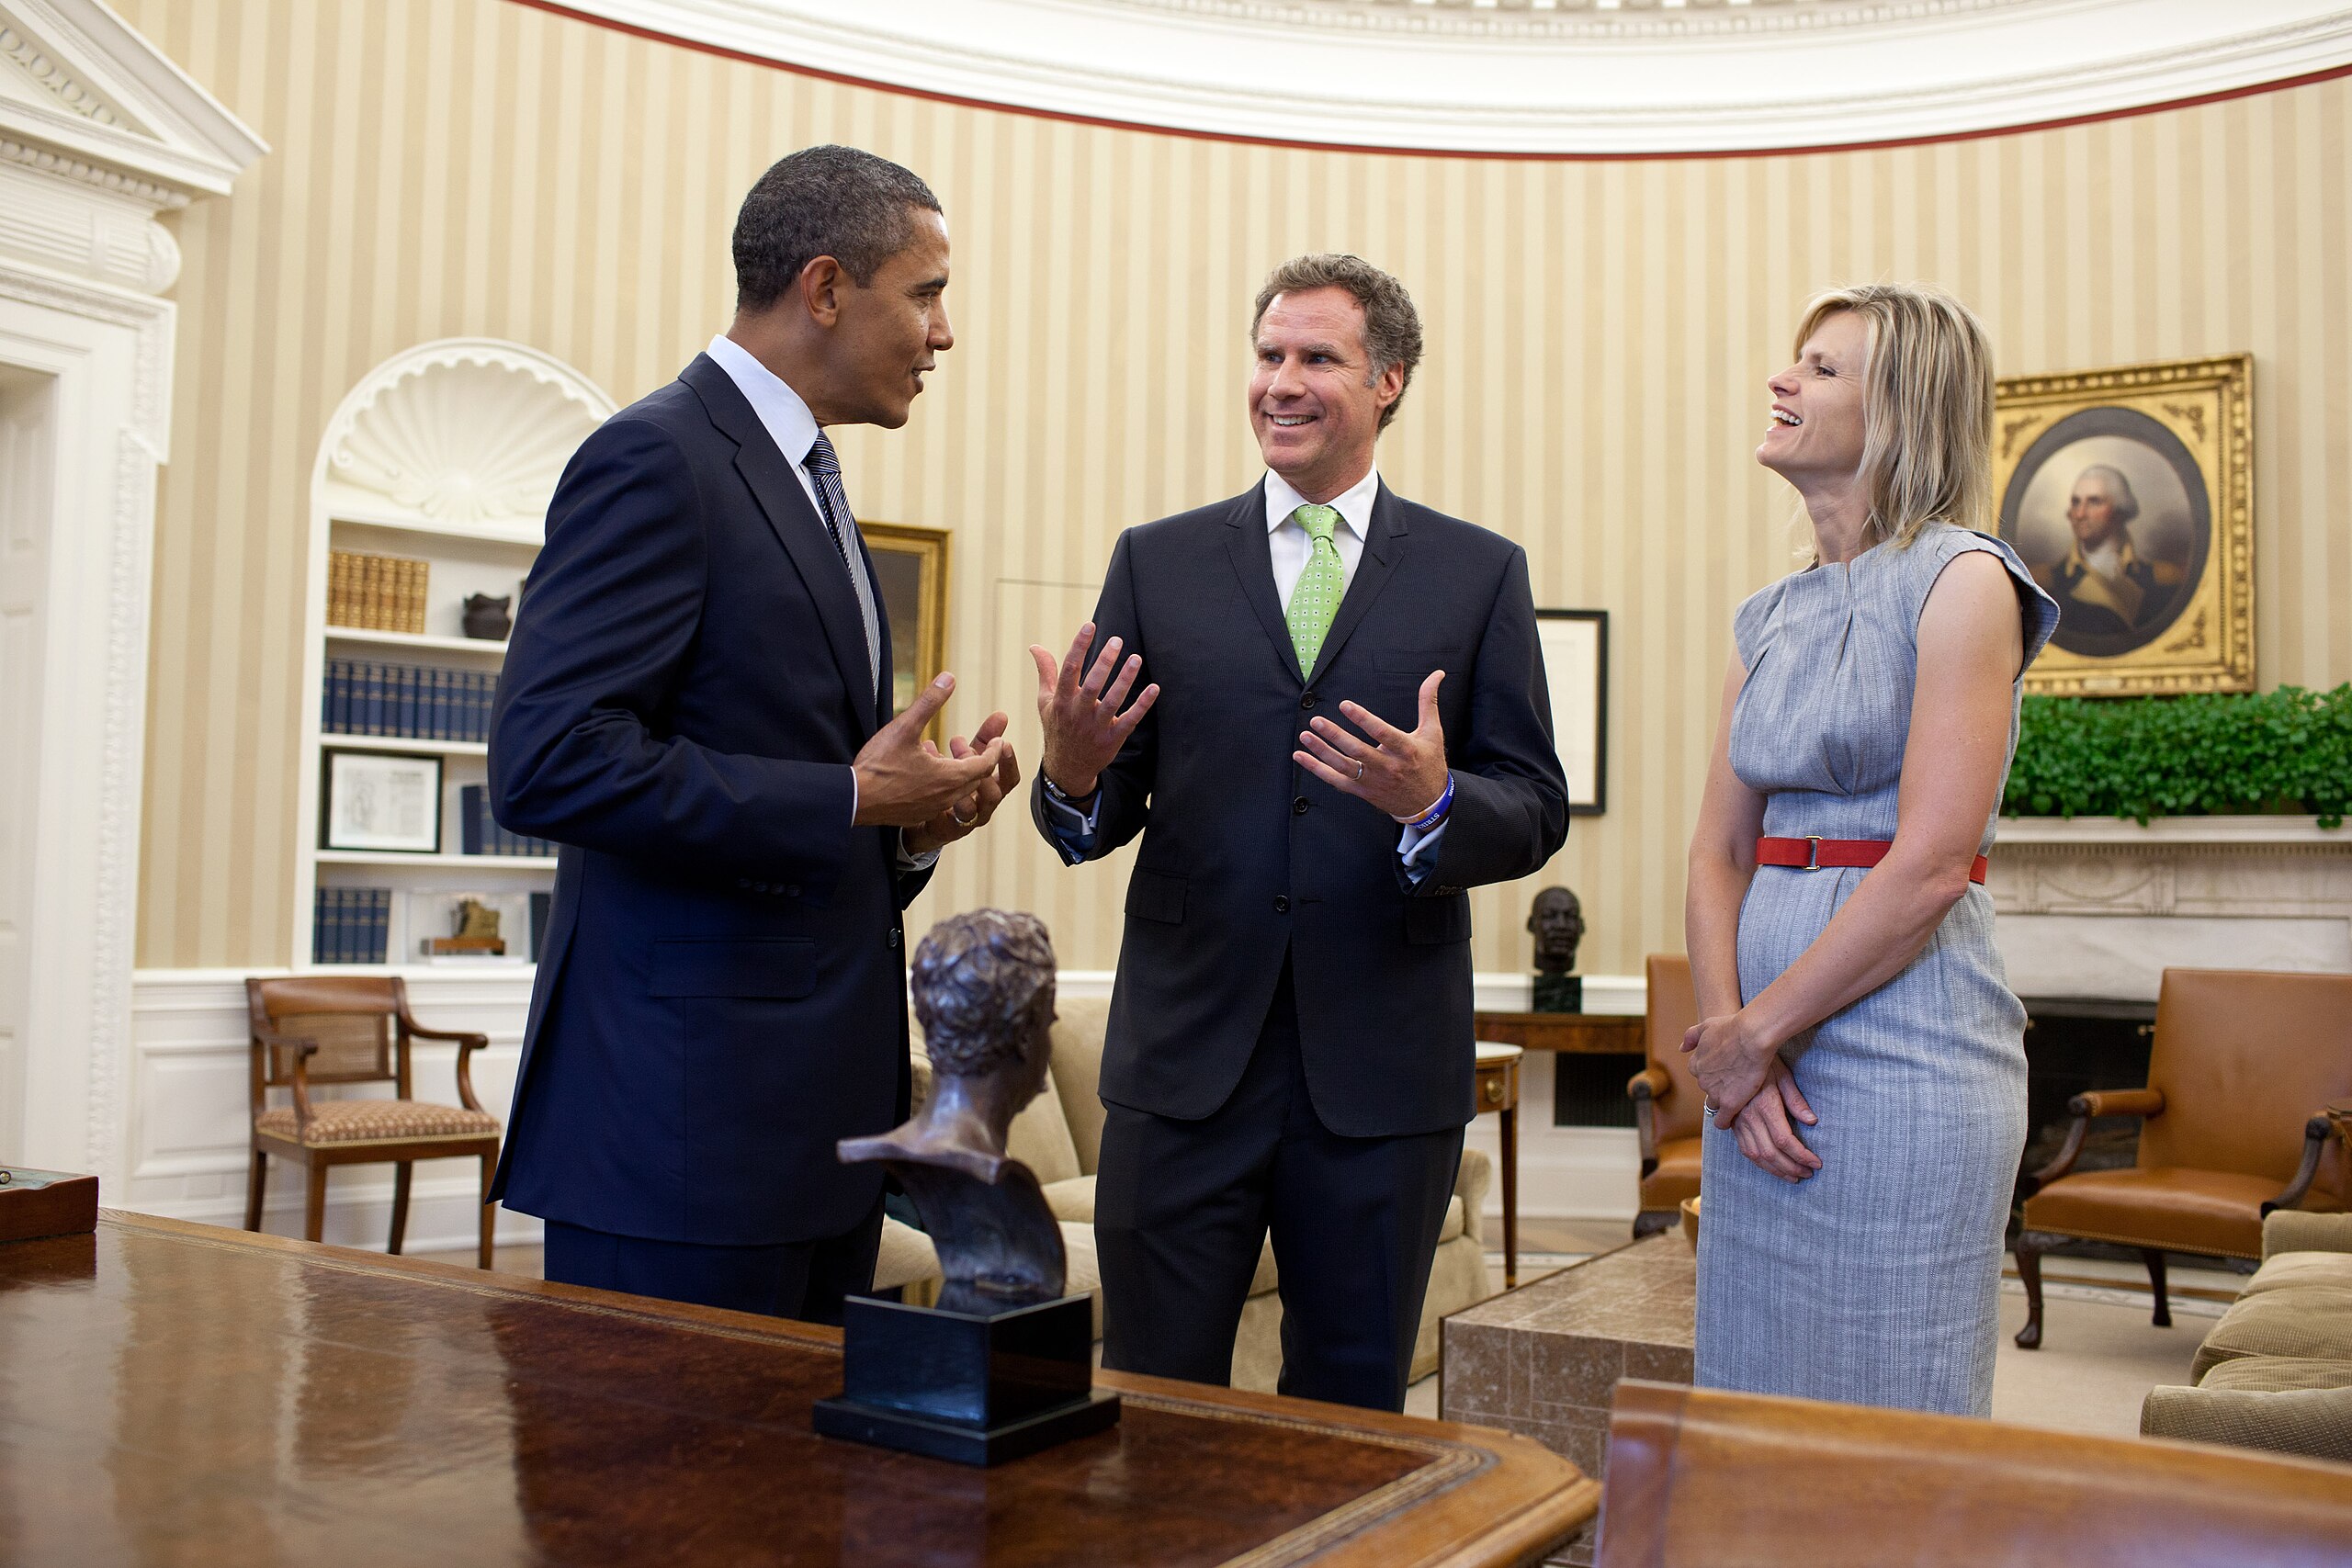 President Barack Obama congratulates Will Ferrell for recently winning the Mark Twain Prize for American Humor during an Oval Office drop-by, Oct. 21, 2011. Ferrell's wife, Viveca Paulin, right. (Official White House Photo by Pete Souza)